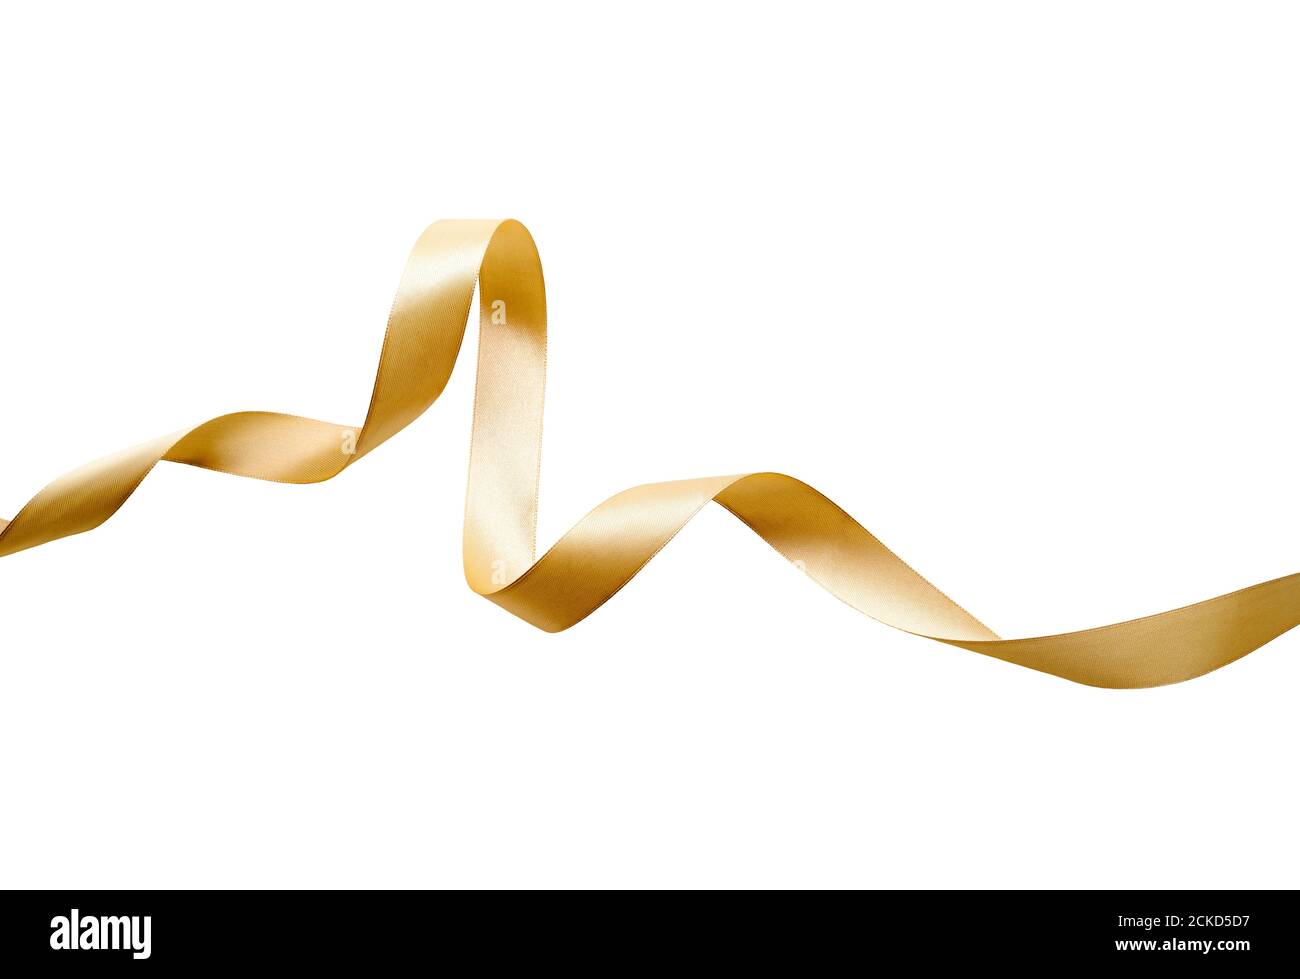 A curly gold ribbon for Christmas and birthday present banner isolated against a white background. Stock Photo